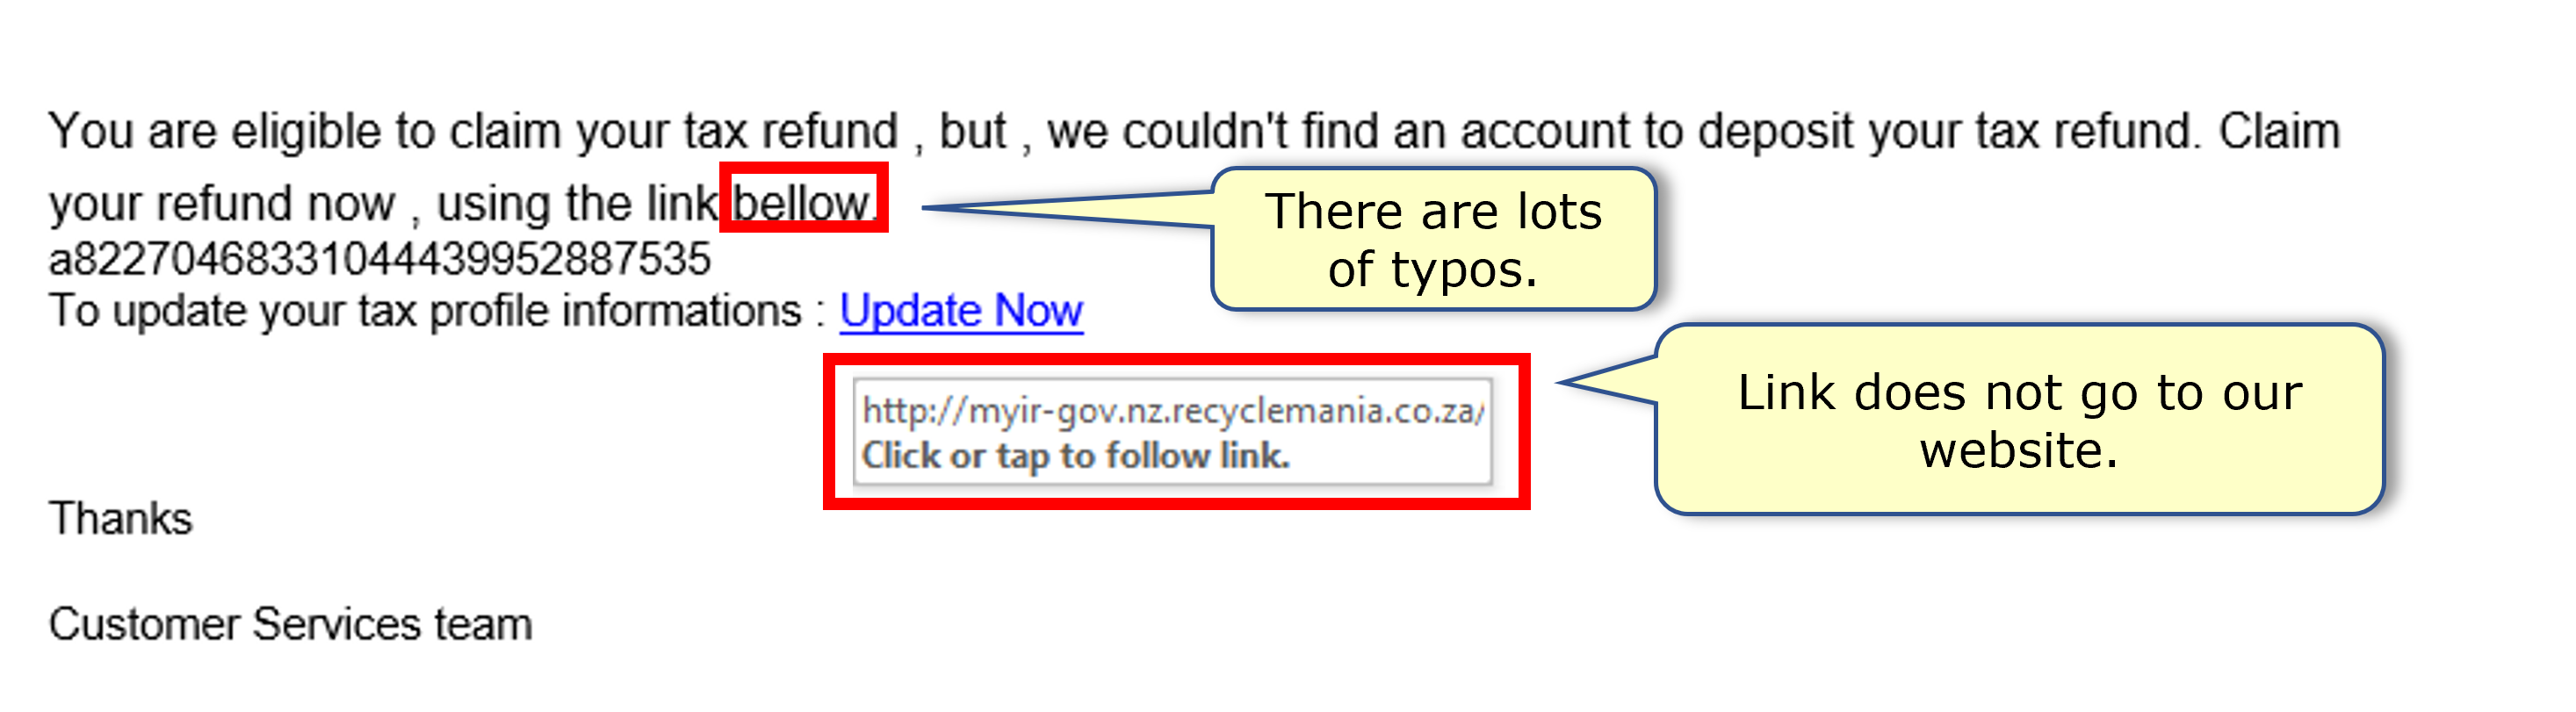 A scam email with spelling errors and a link to a South African website.